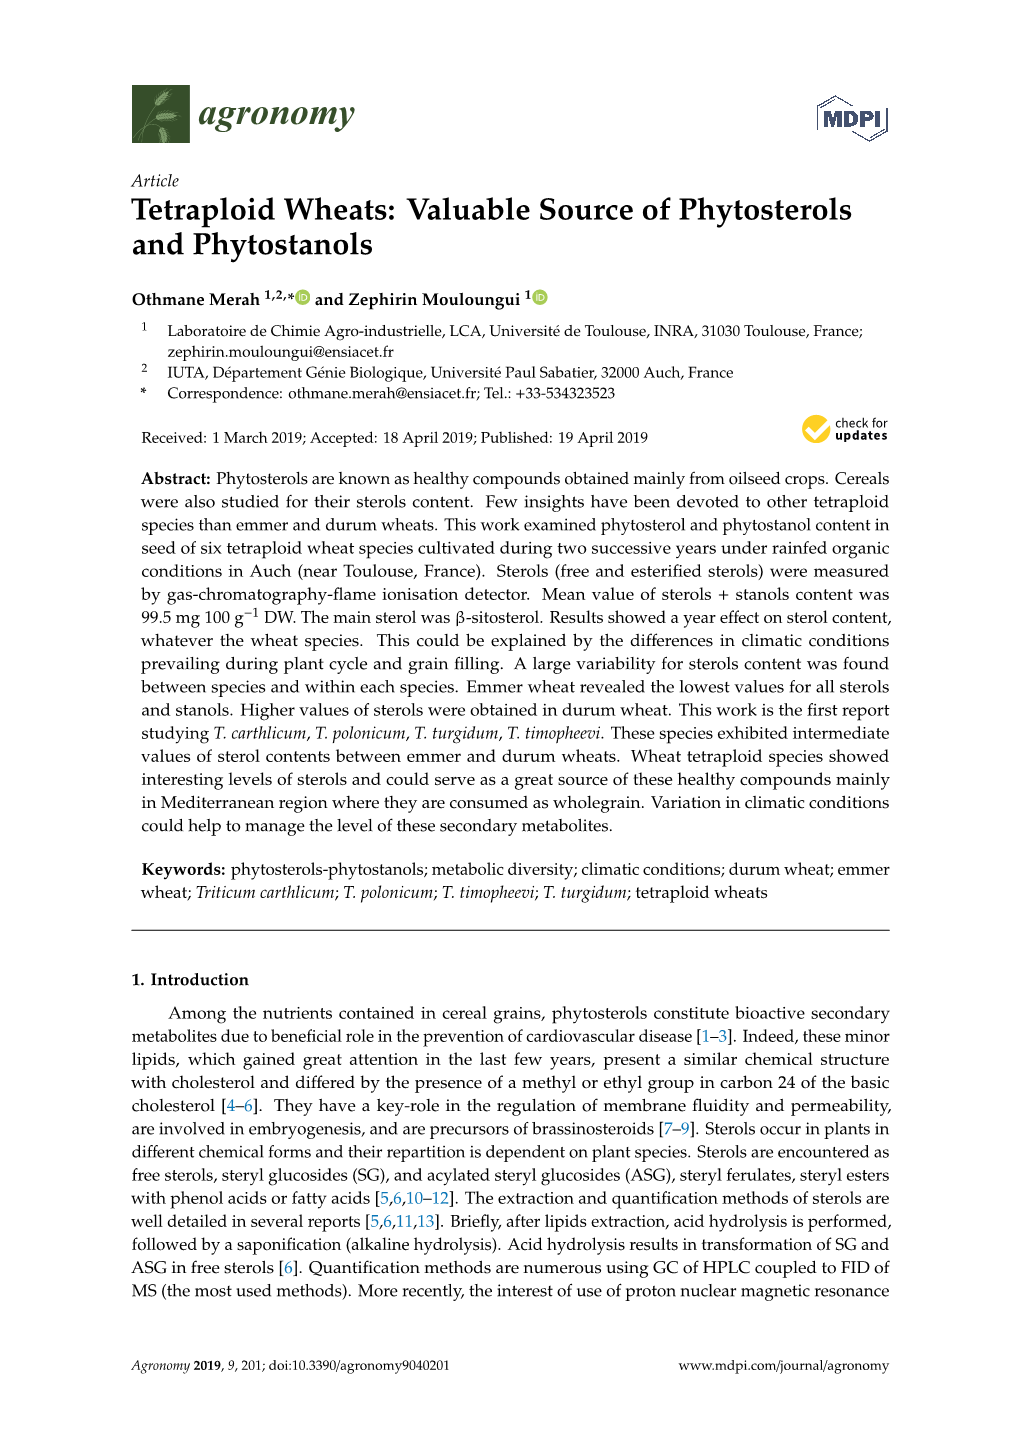 Tetraploid Wheats: Valuable Source of Phytosterols and Phytostanols